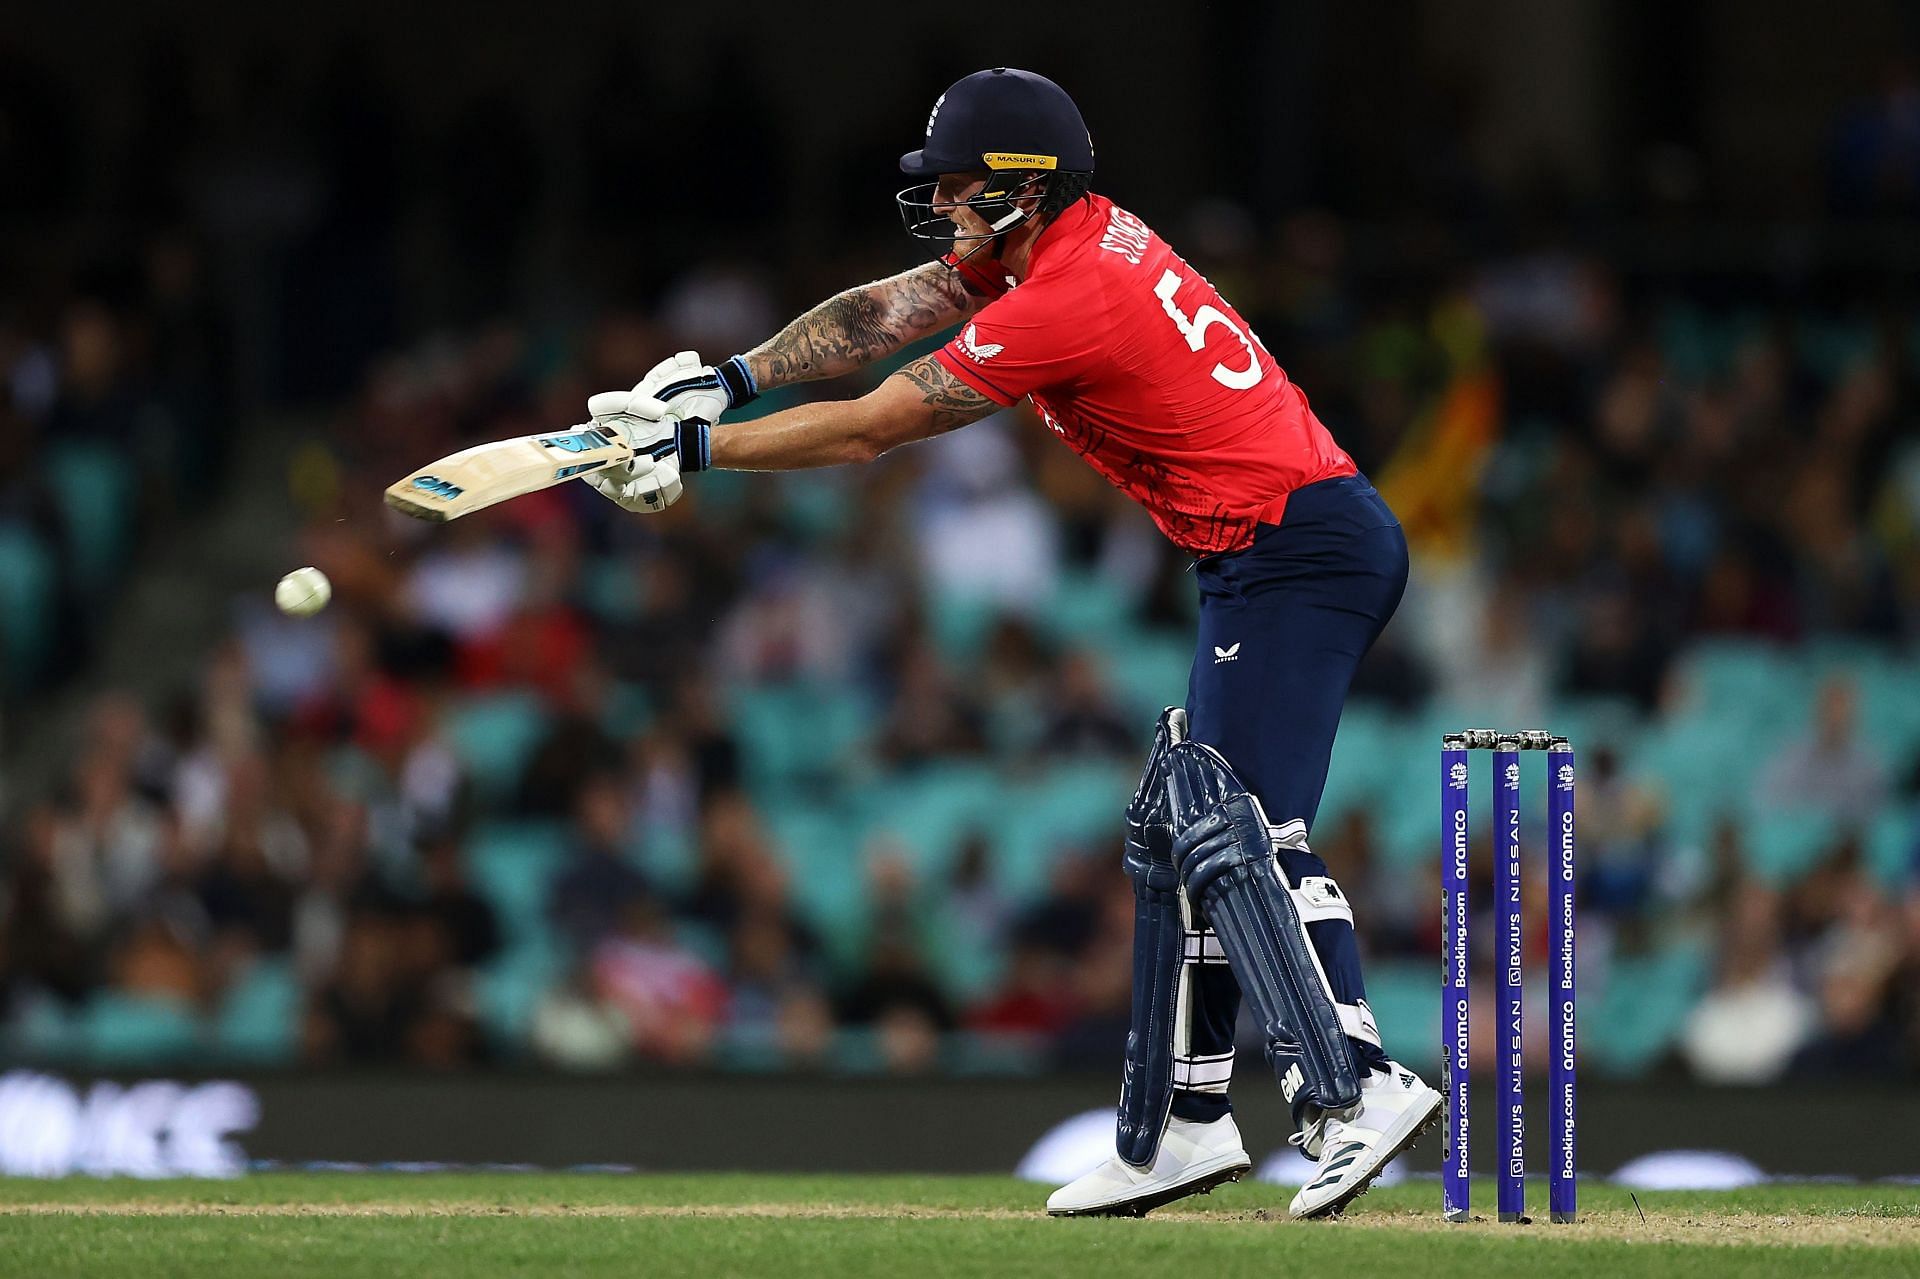 Ben Stokes struck just two boundaries during his innings.